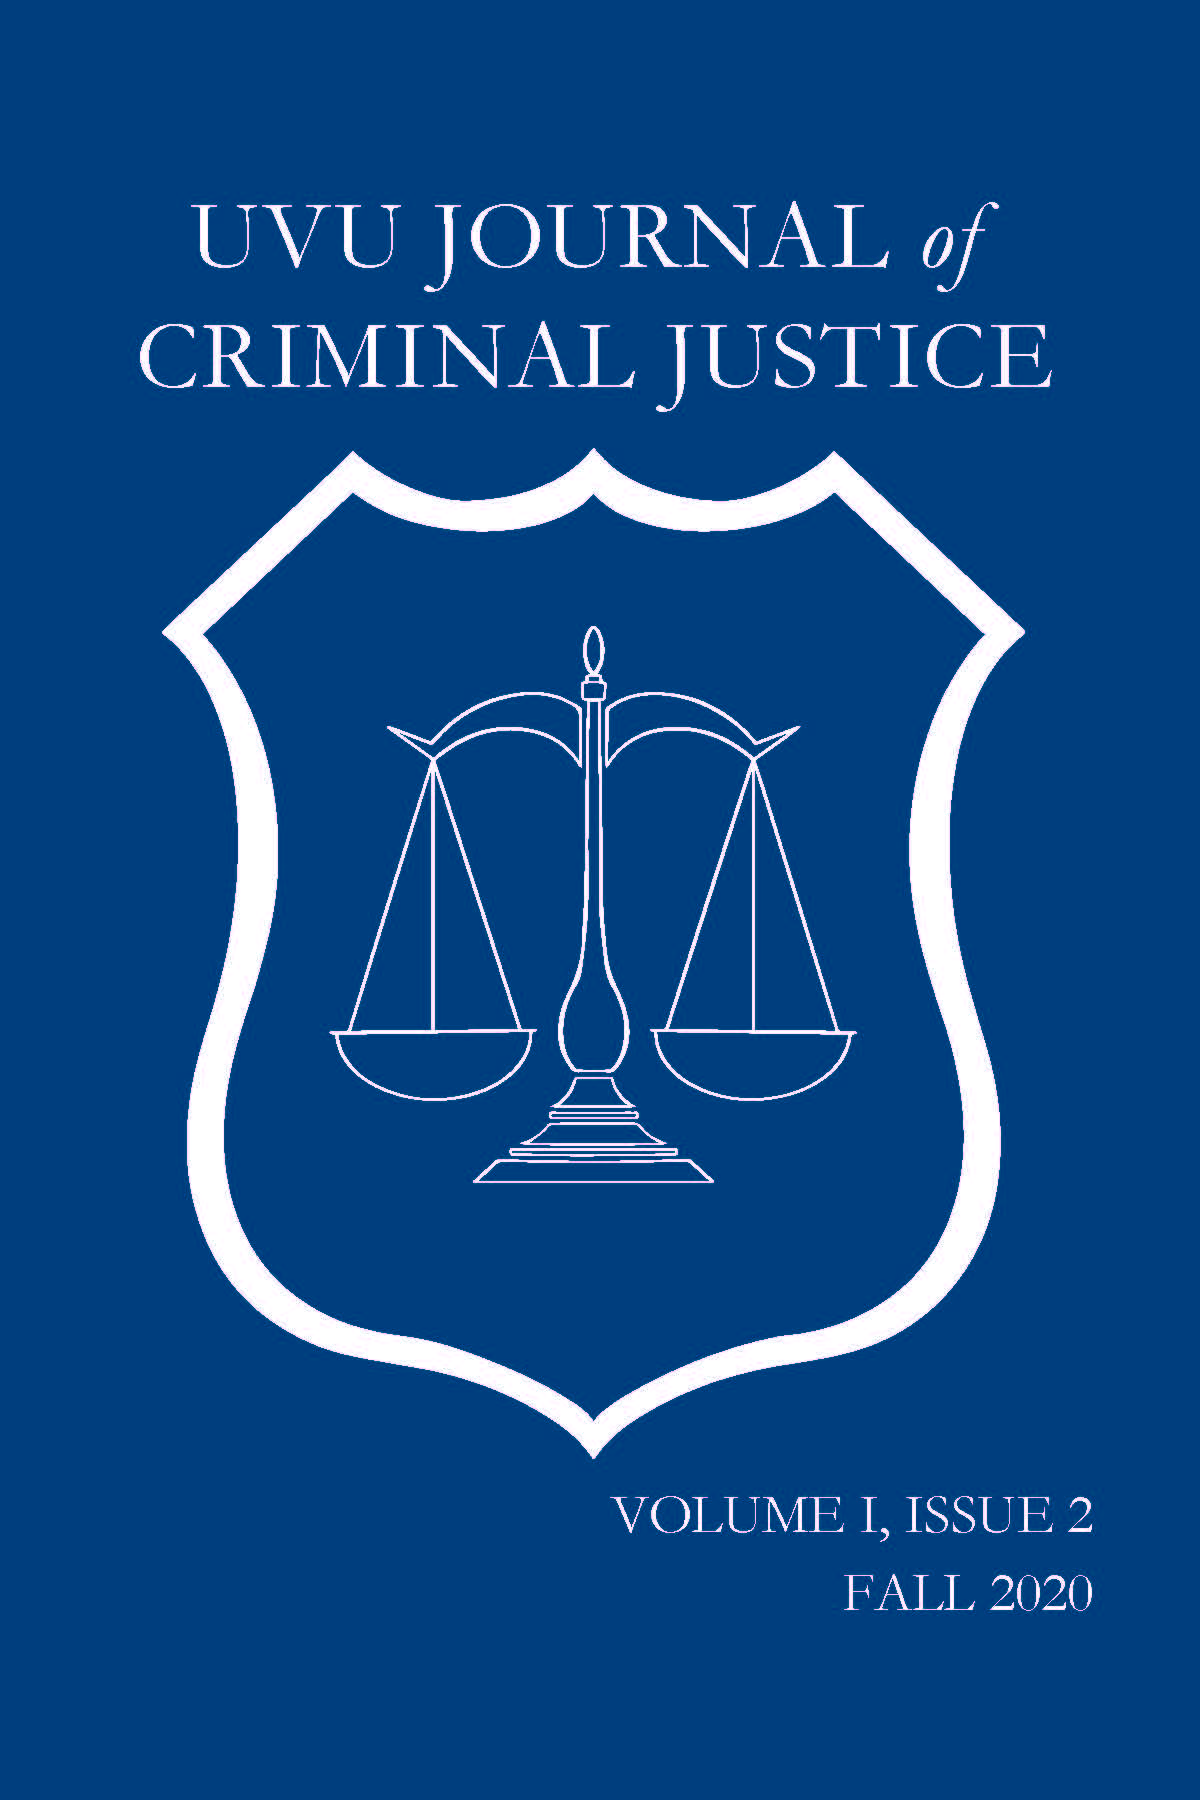 Cover of 2020 spring journal showing the scales of justice